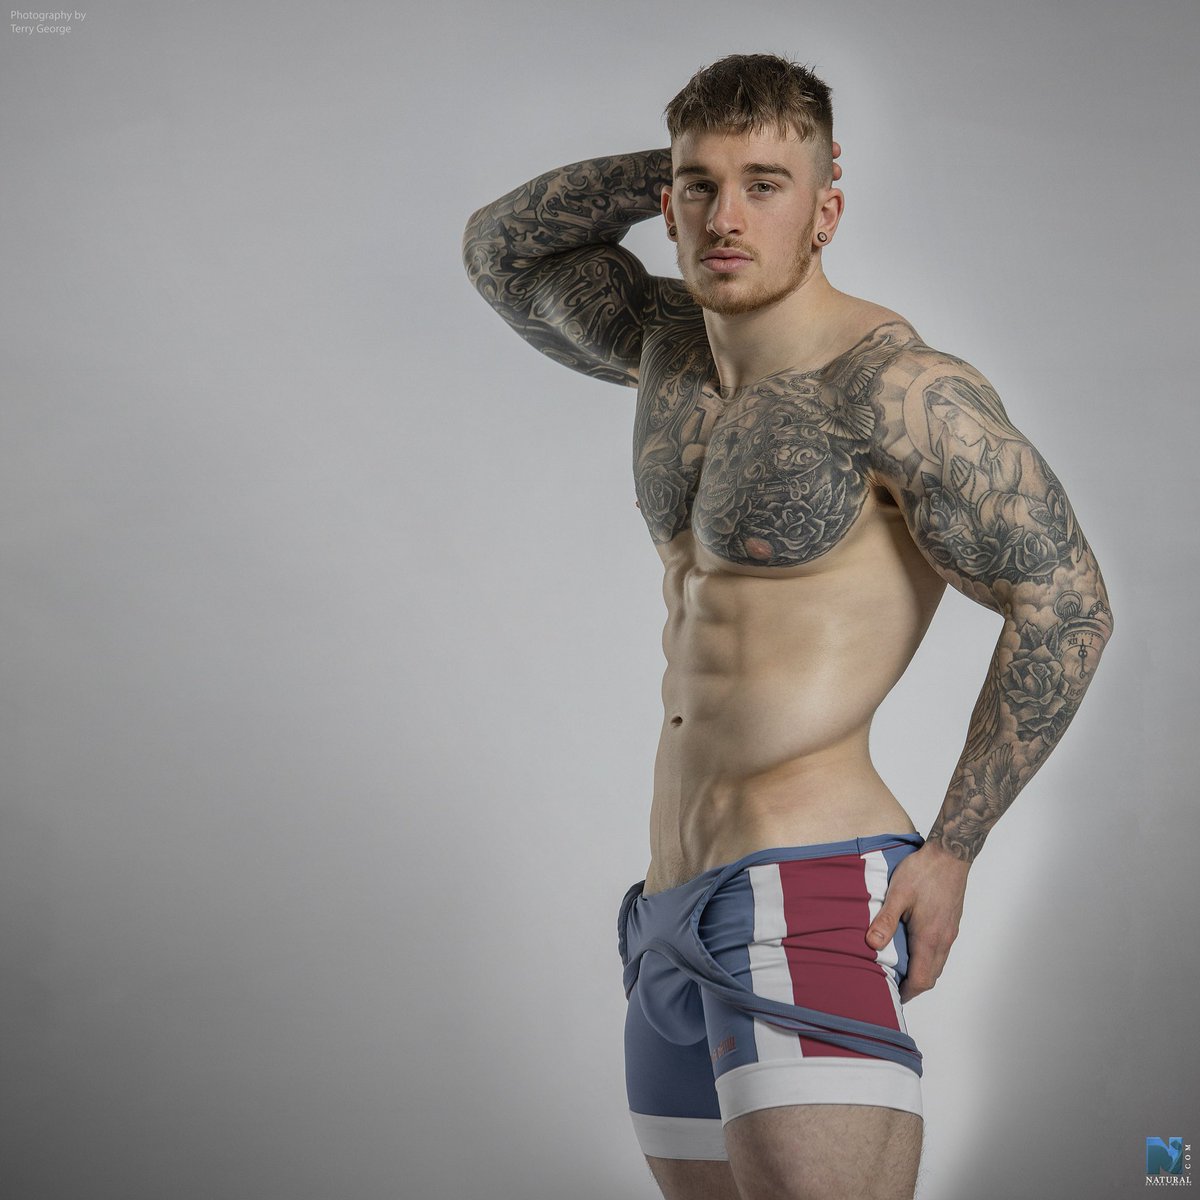 Chris Hatton Ig Related Keywords & Suggestions - Chris Hatto